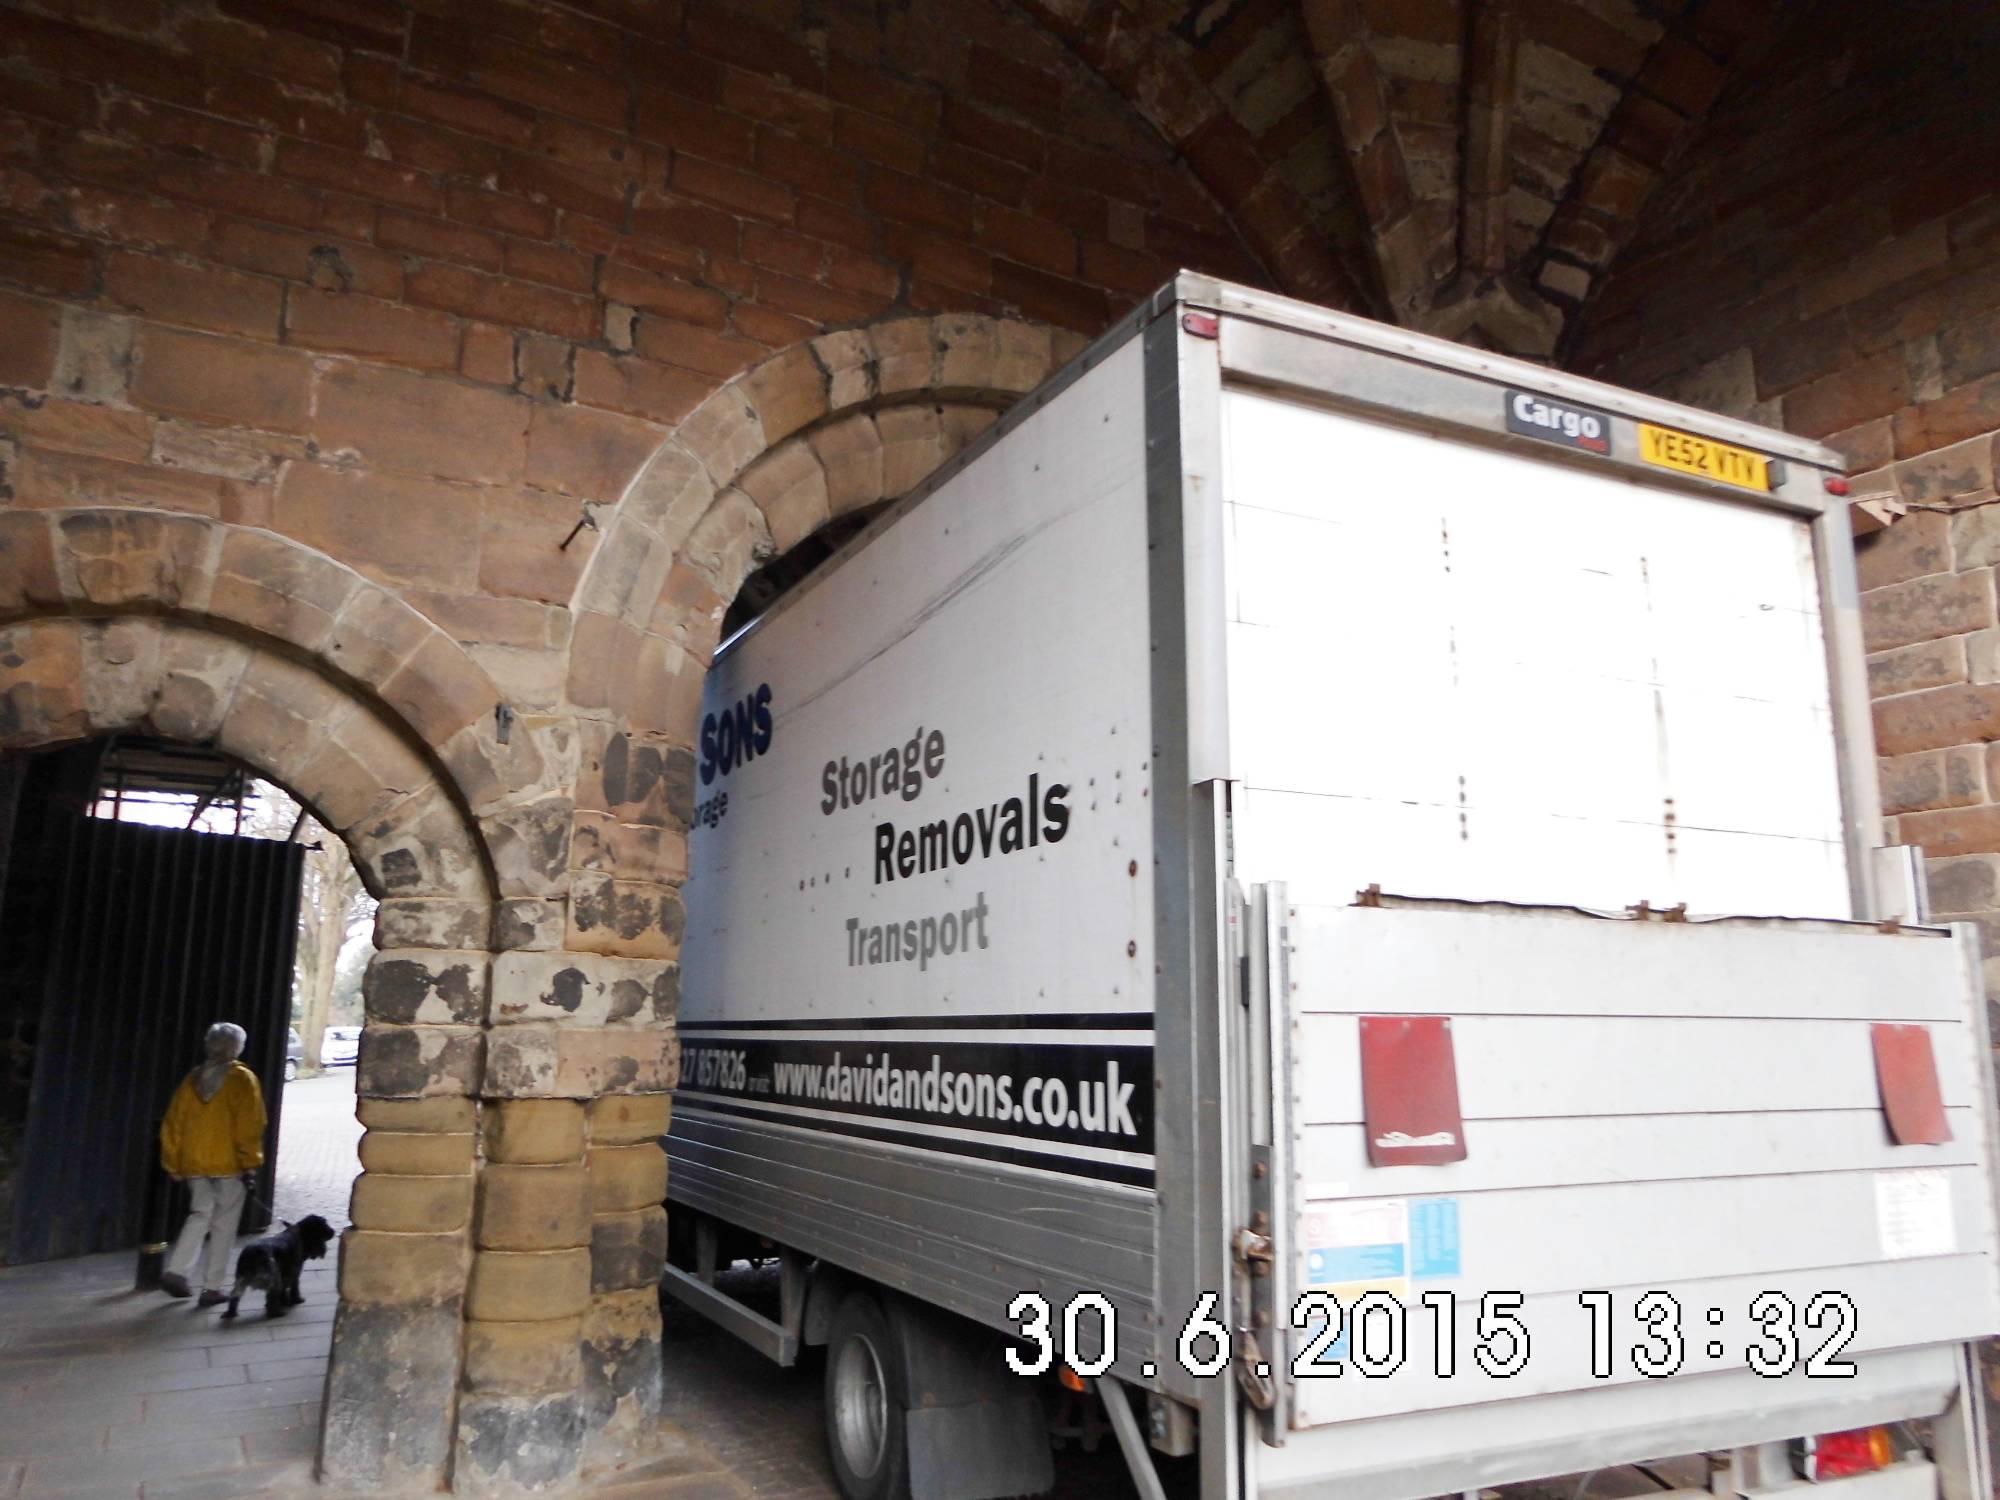 large david and sons van just about fit under tunnel